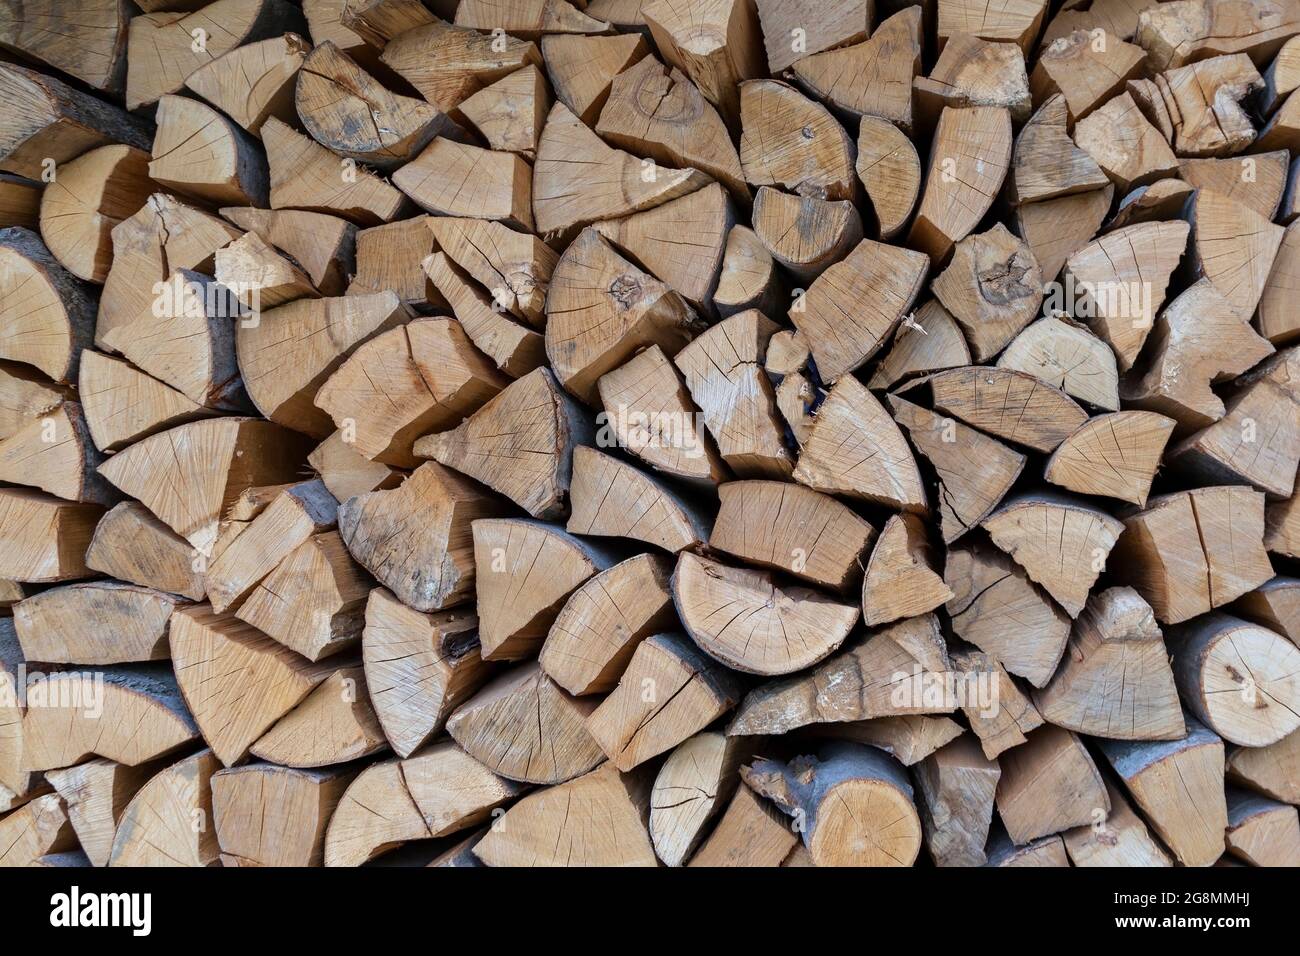 Neatly folded, chopped firewood. Harvesting firewood for the winter, preparing for the heating season. Stock Photo